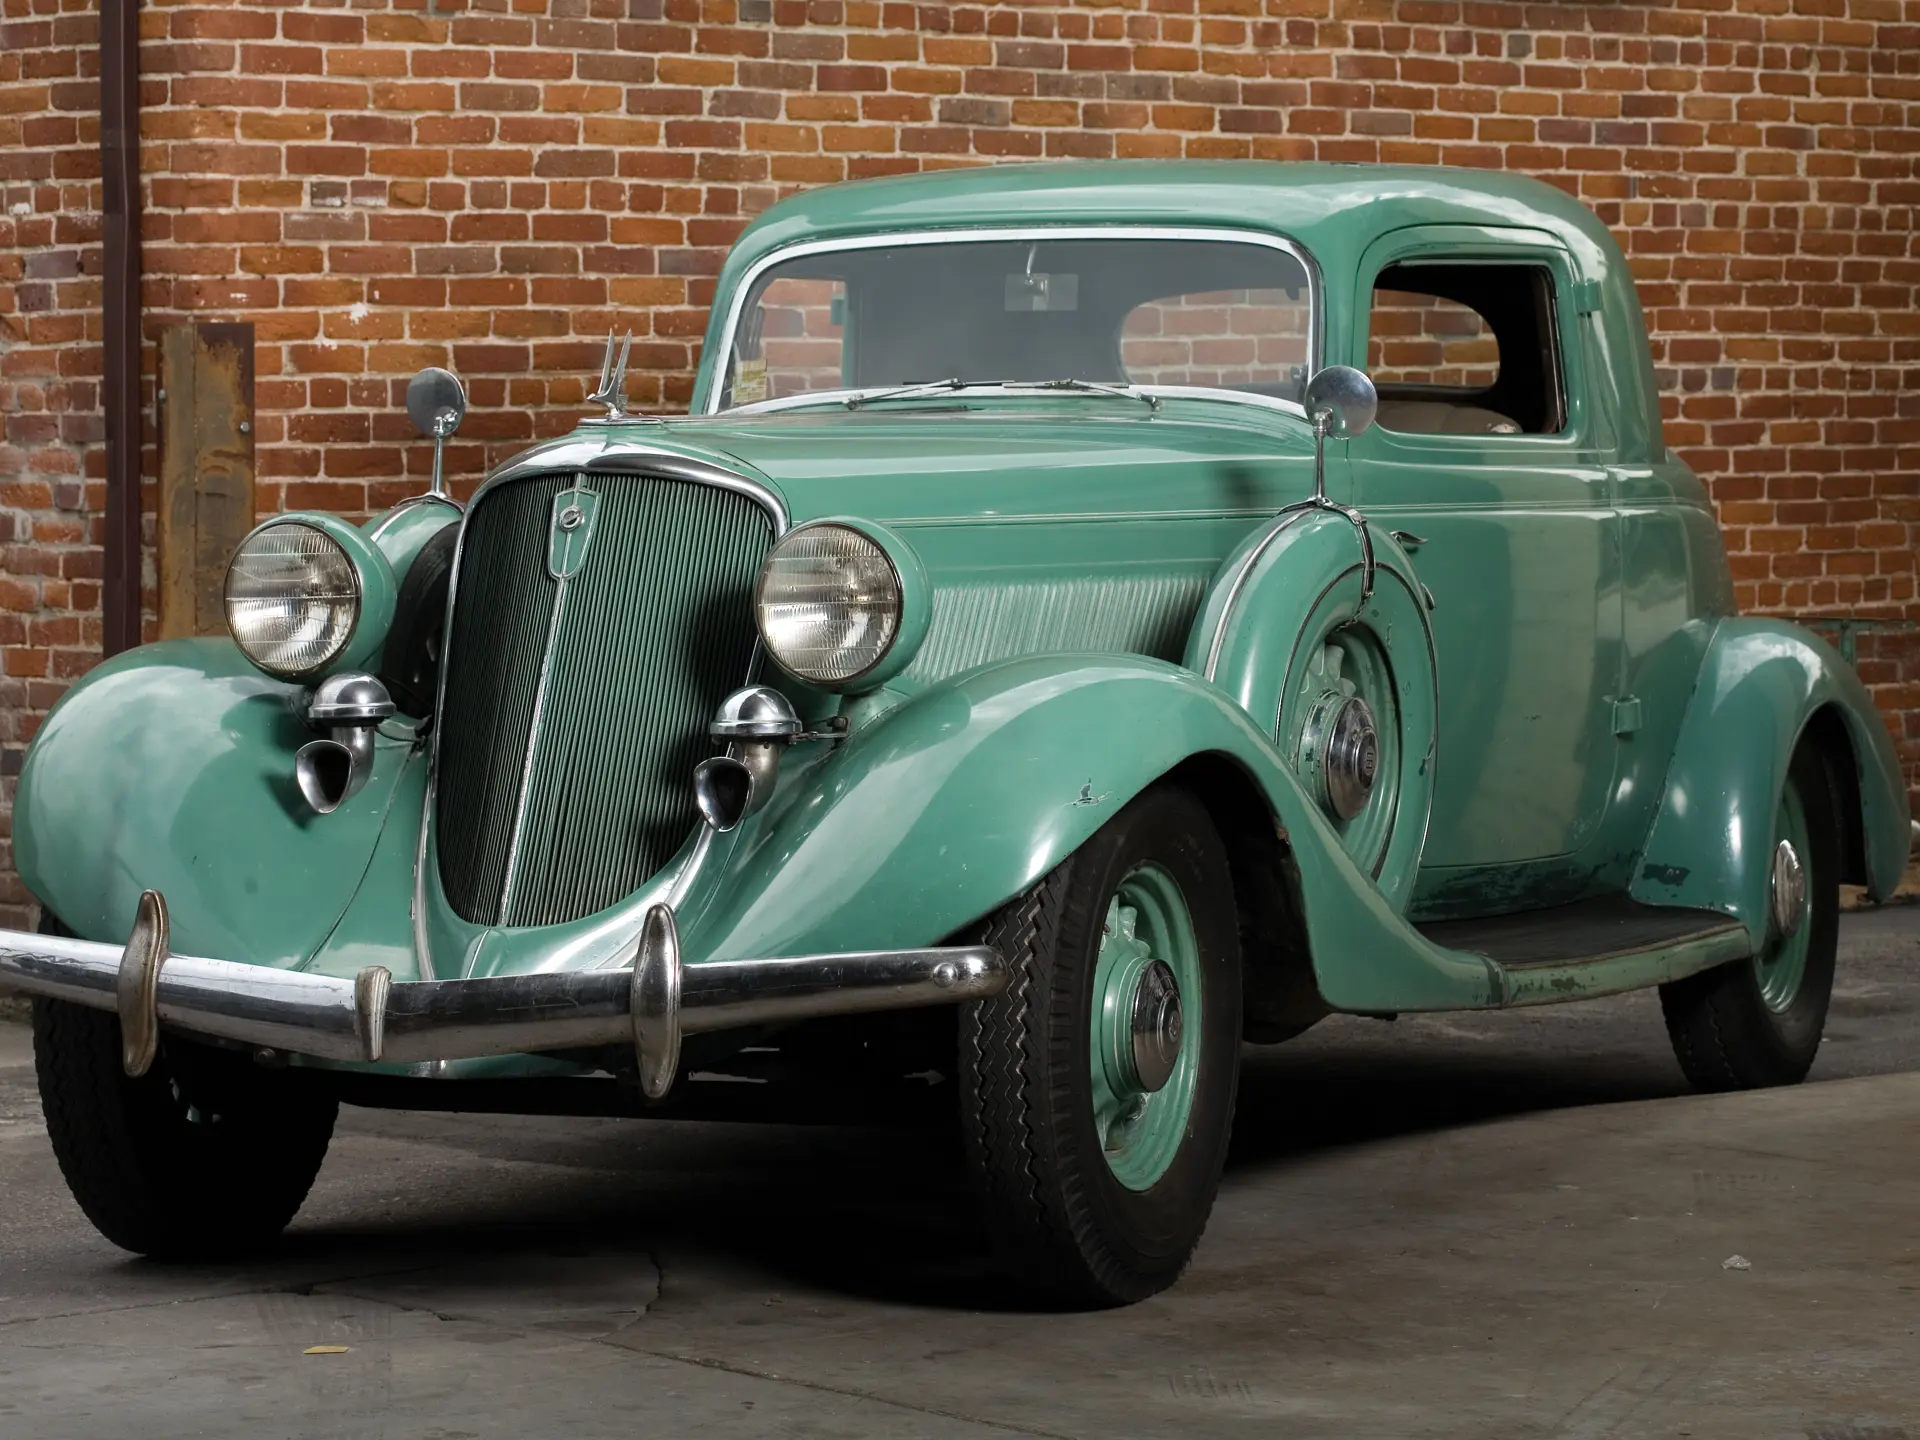 1934 Studebaker President Coupe | The Brucker Collection | RM Sotheby's